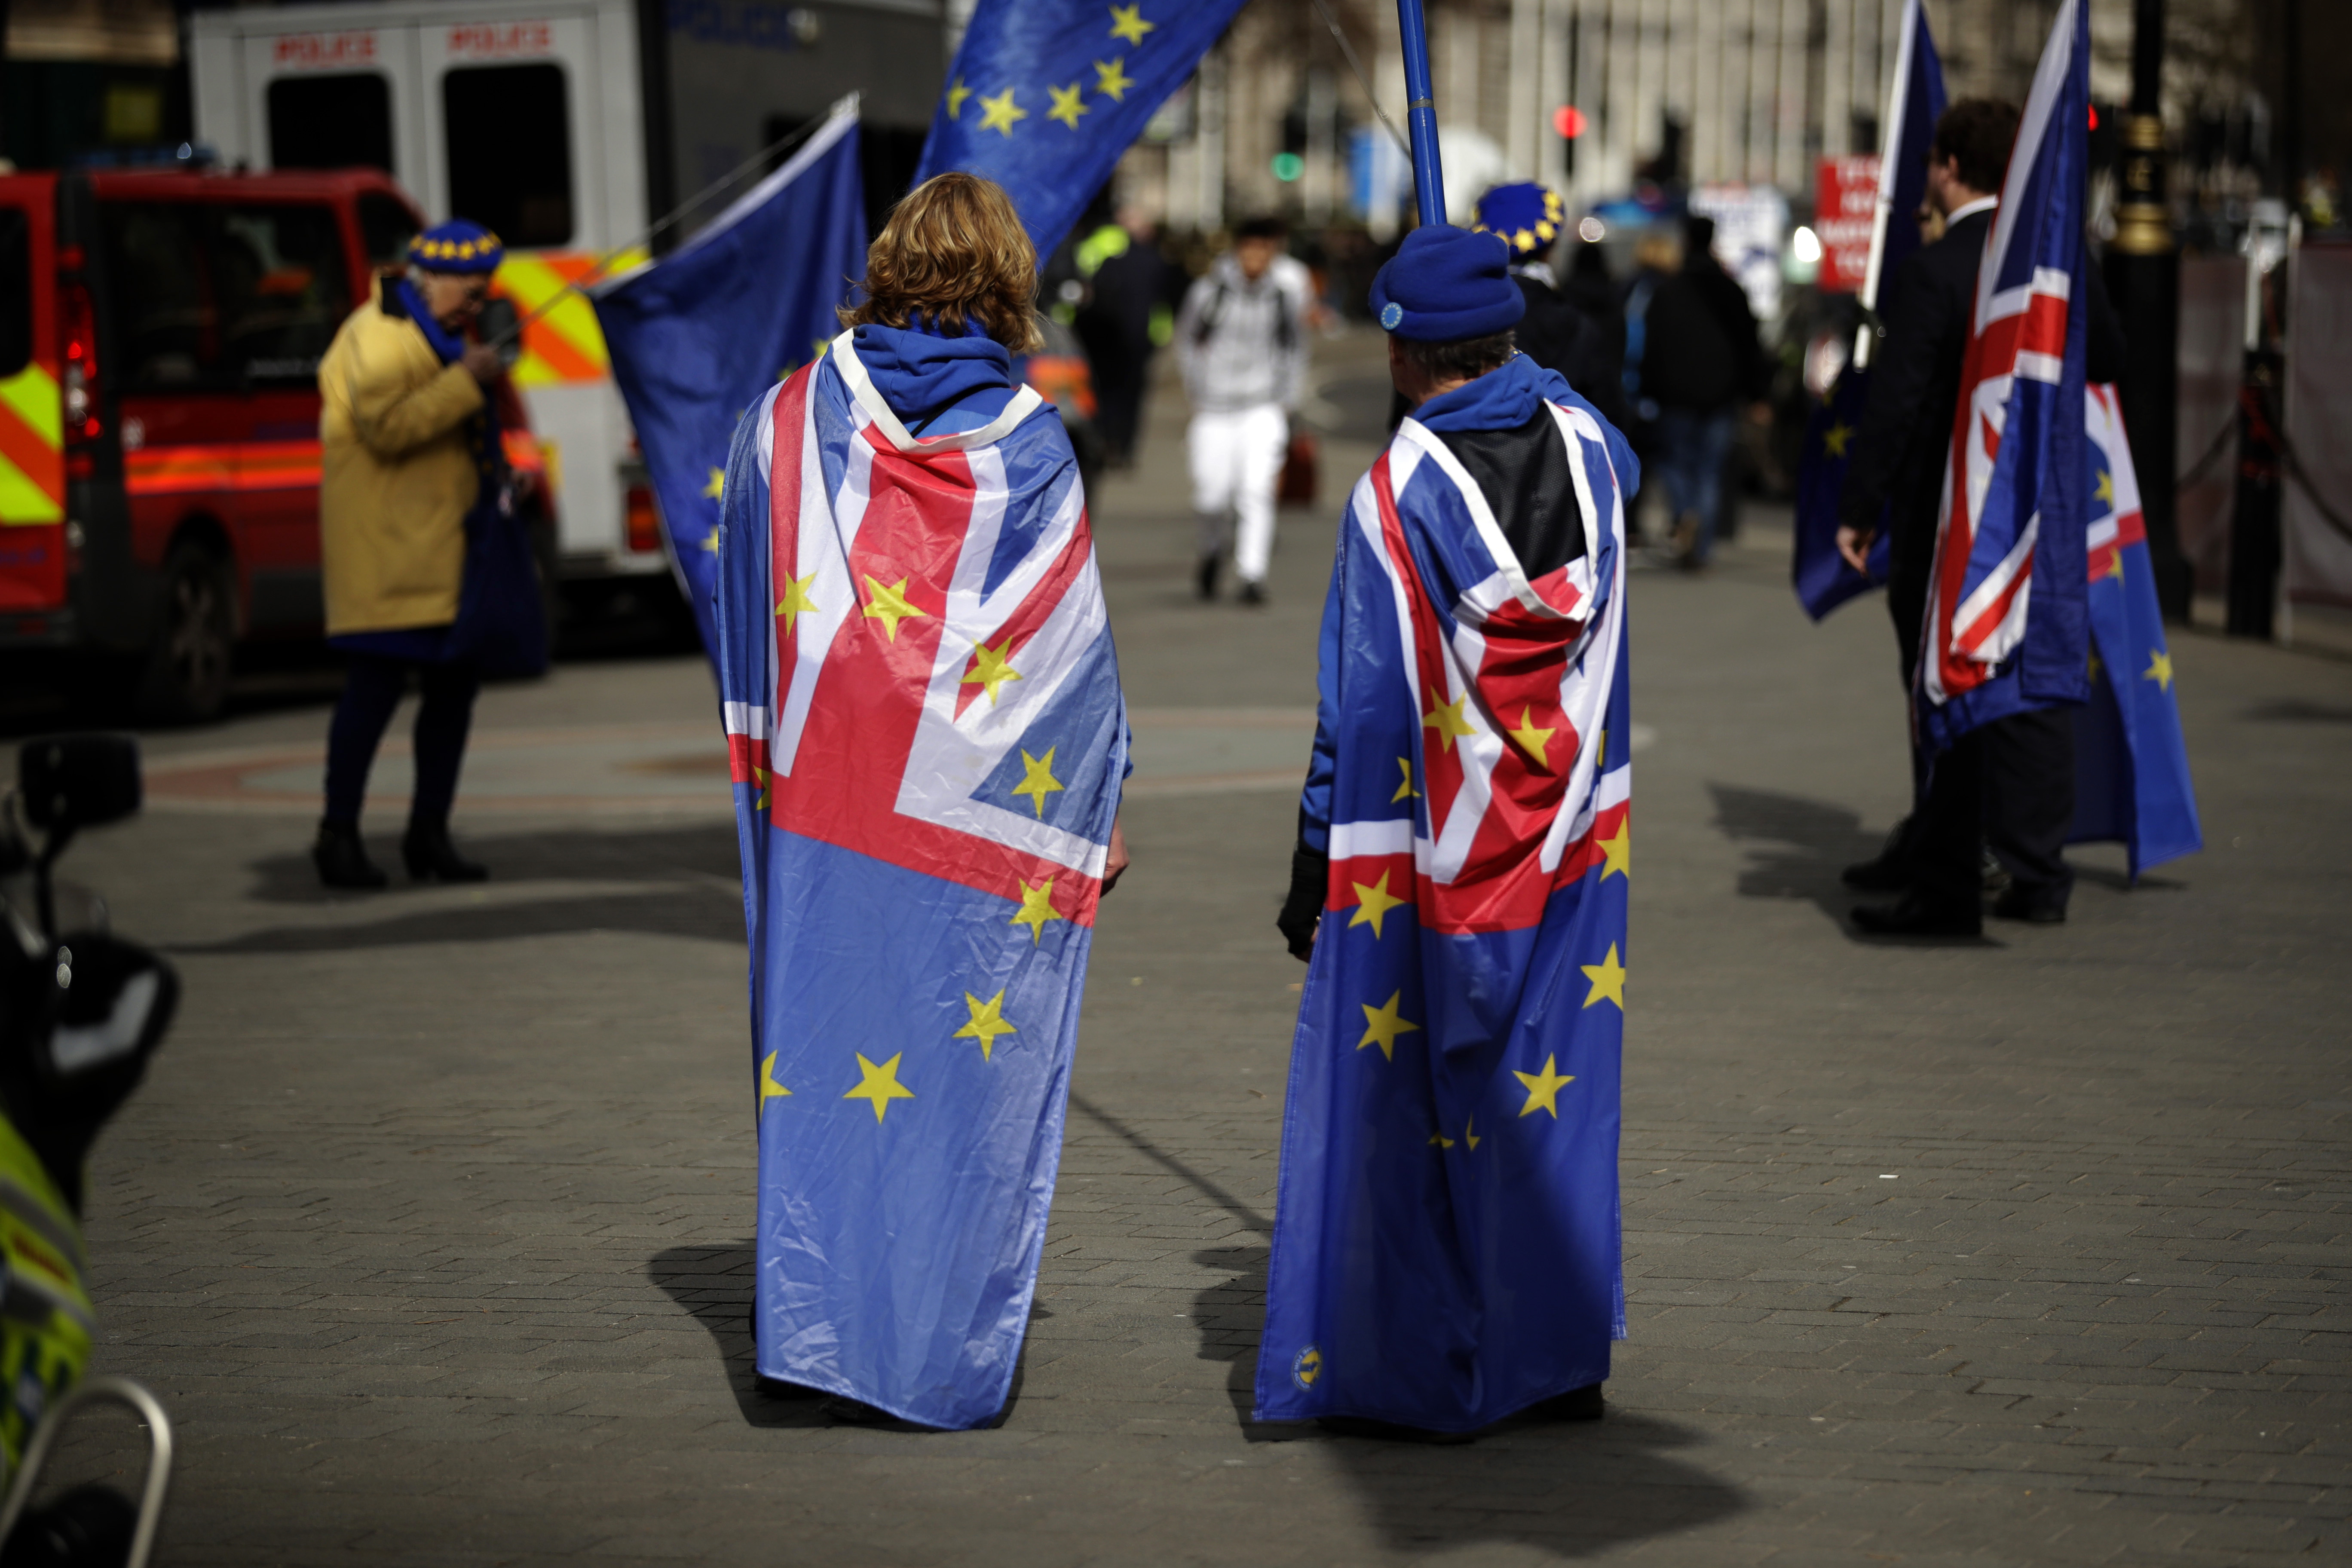 Anti-Brexit supporters protest opposite the Houses of Parliament in London, Monday, March 18, 2019. British Prime Minister Theresa May was making a last-minute push Monday to win support for her European Union divorce deal, warning opponents that failure to approve it would mean a long — and possibly indefinite — delay to Brexit. Parliament has rejected the agreement twice, but May aims to try a third time this week if she can persuade enough lawmakers to change their minds. (AP Photo/Matt Dunham)